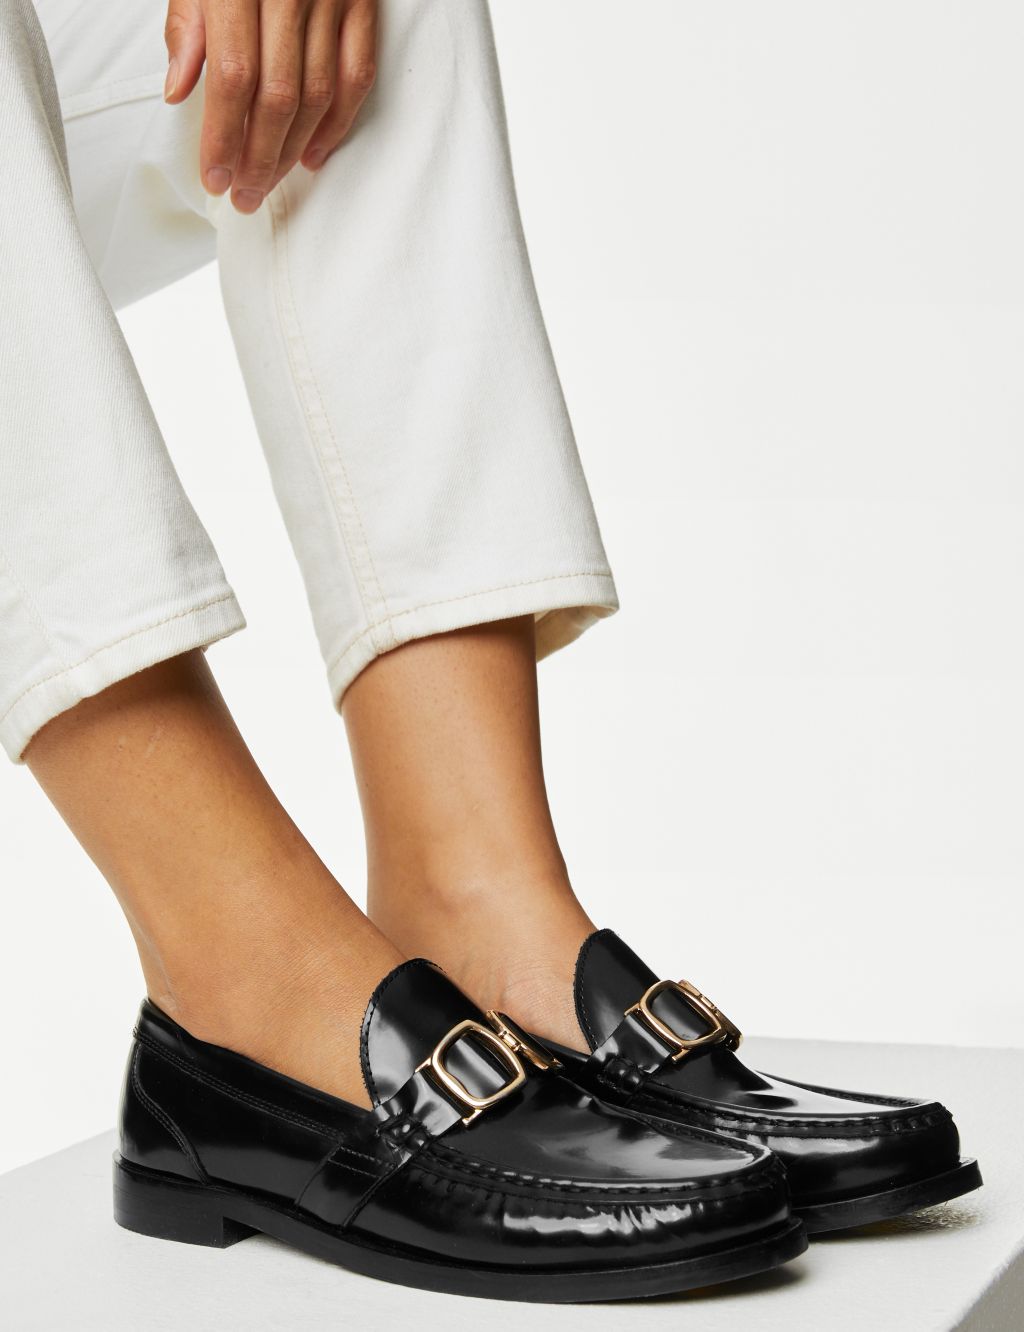 Leather Trim Flat Loafers image 6